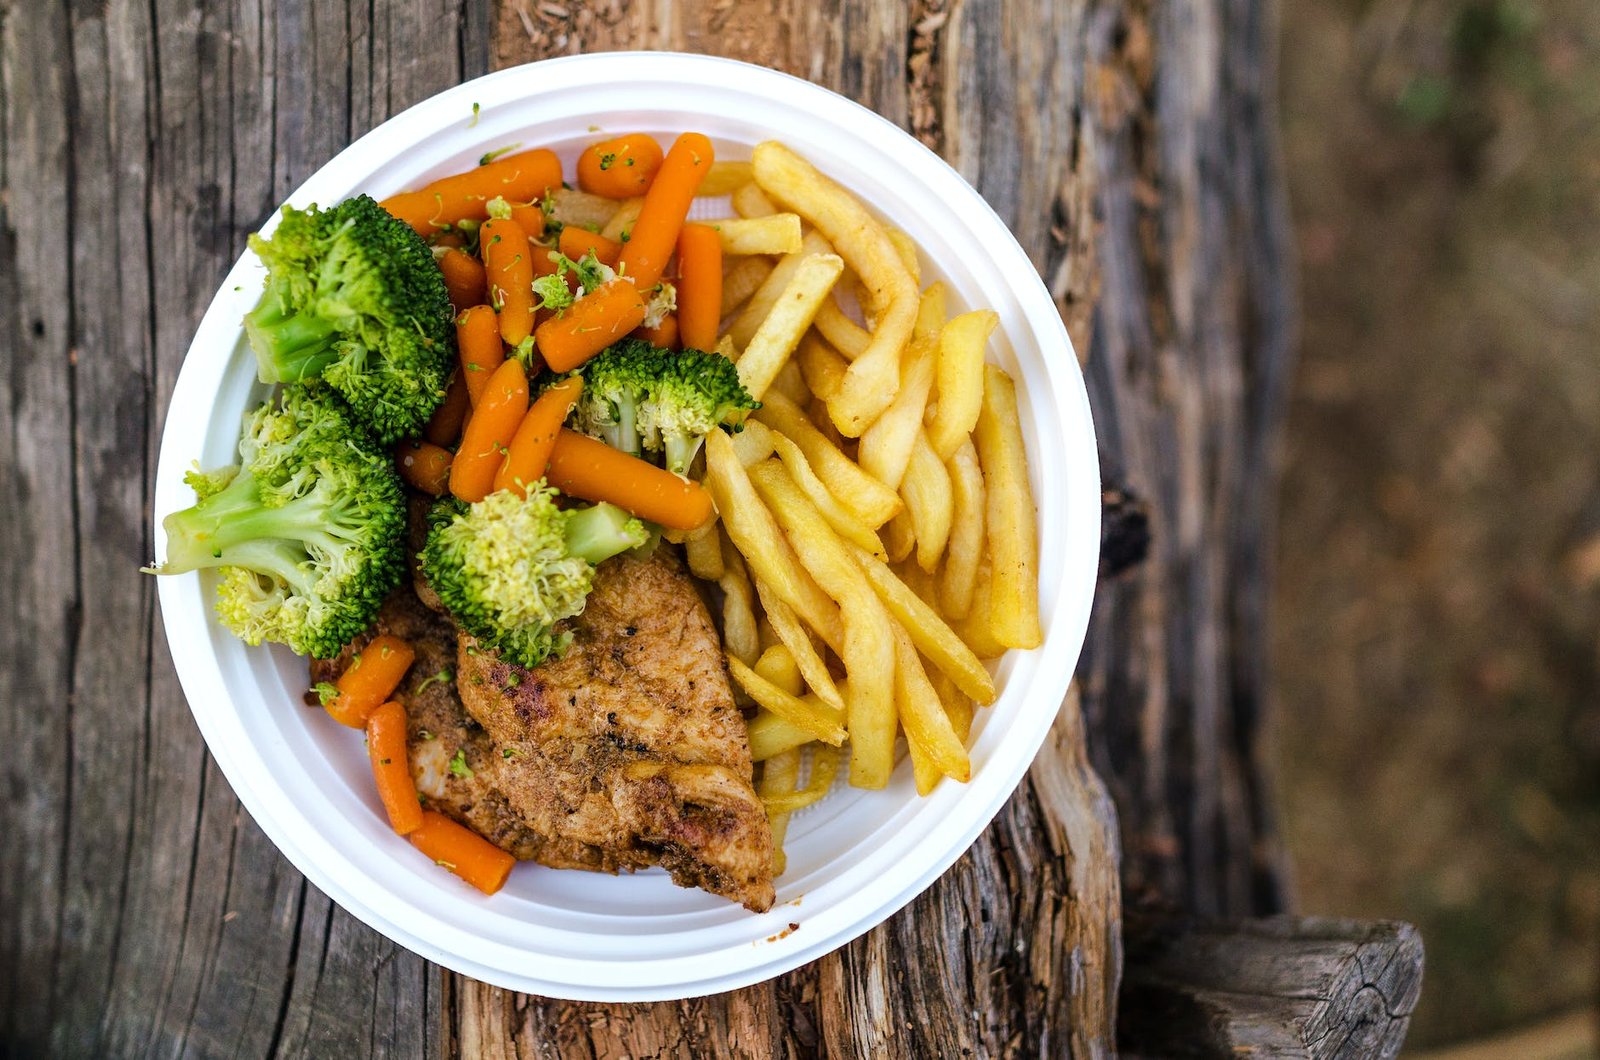 meat broccoli and fries dish